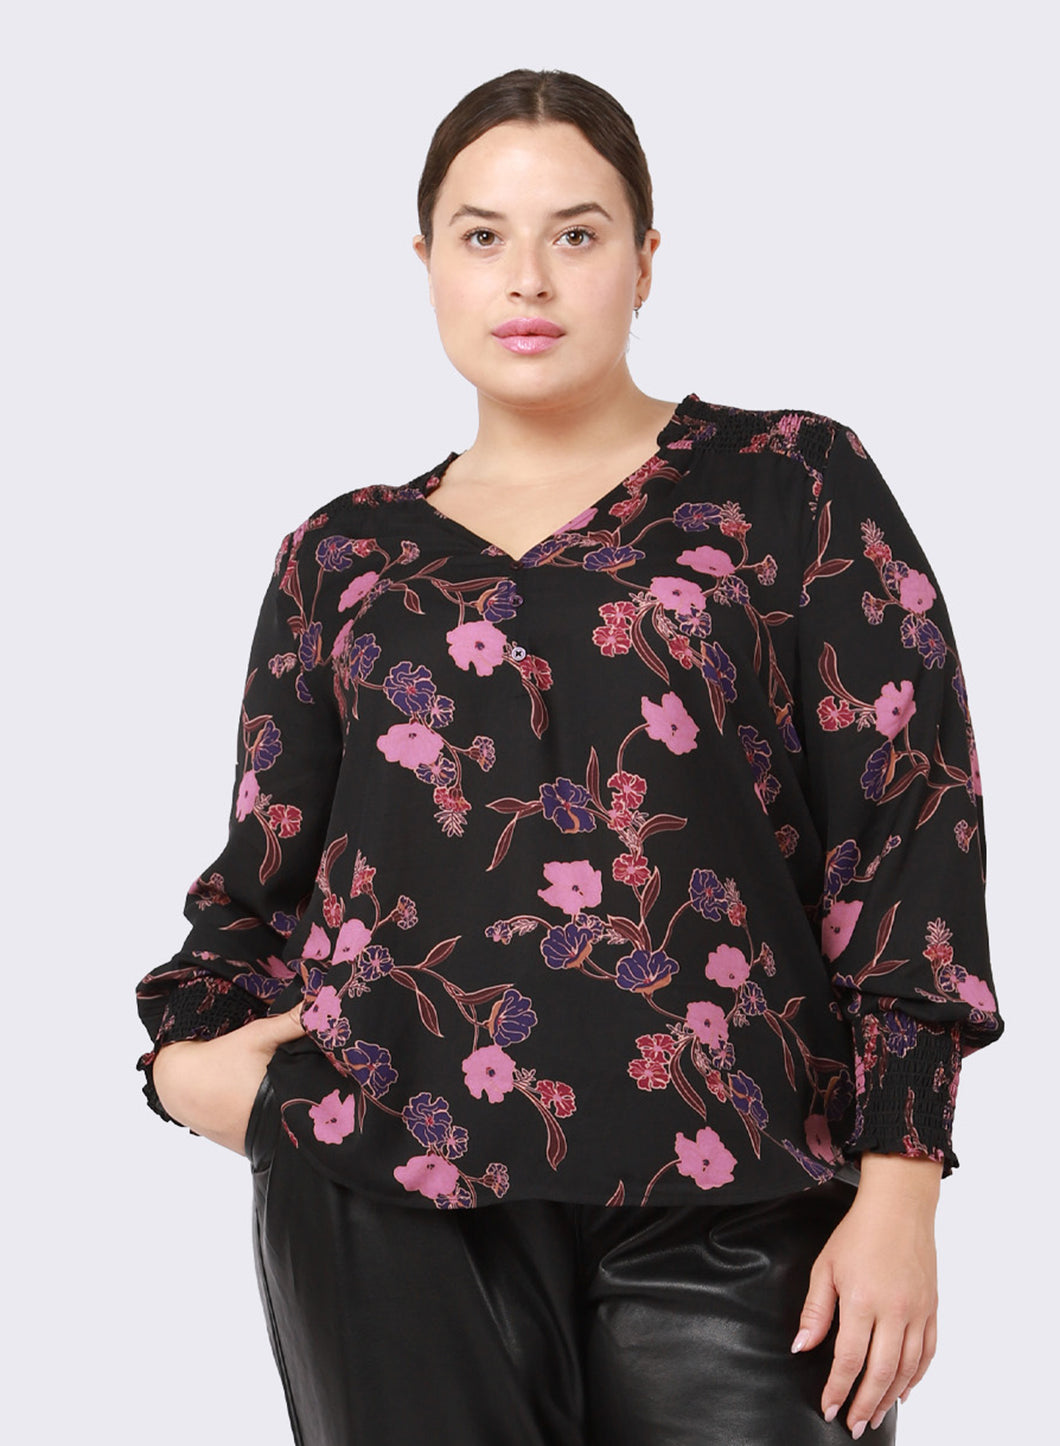 V-NECK TOP W SMOCKED SHOULDER TOP by Dex (available in plus sizes)